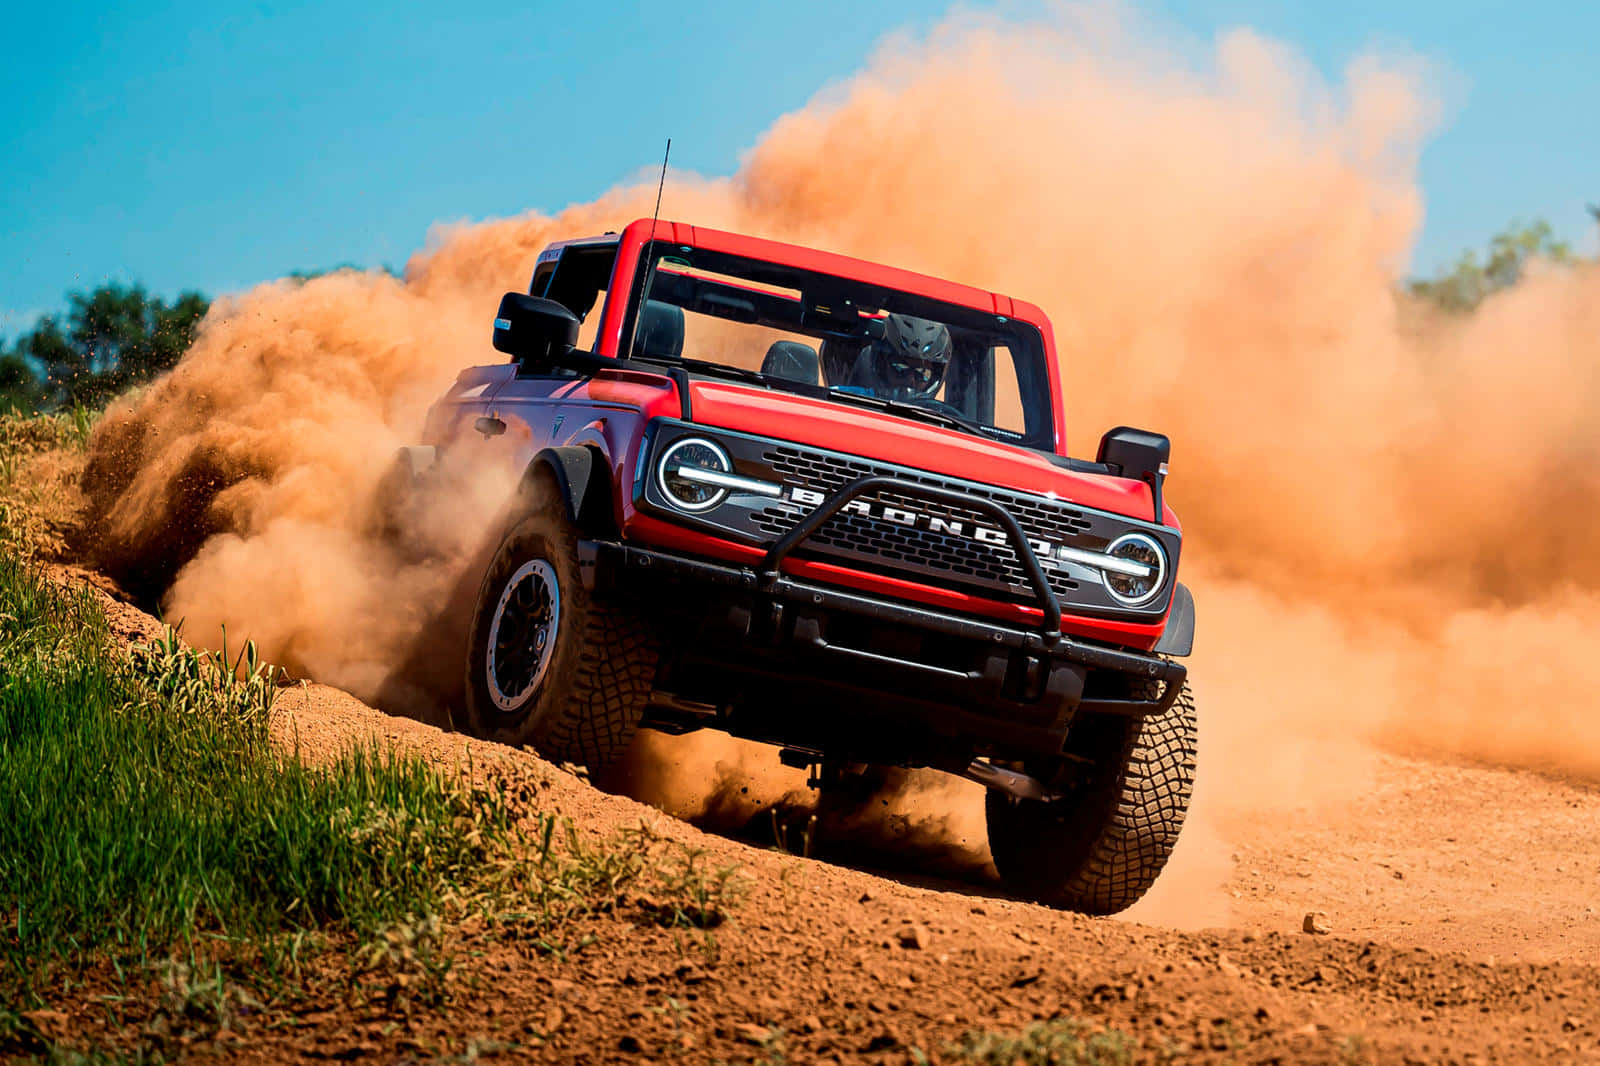 "Excitement, adventure and a classic American Vibe: the Ford Bronco"